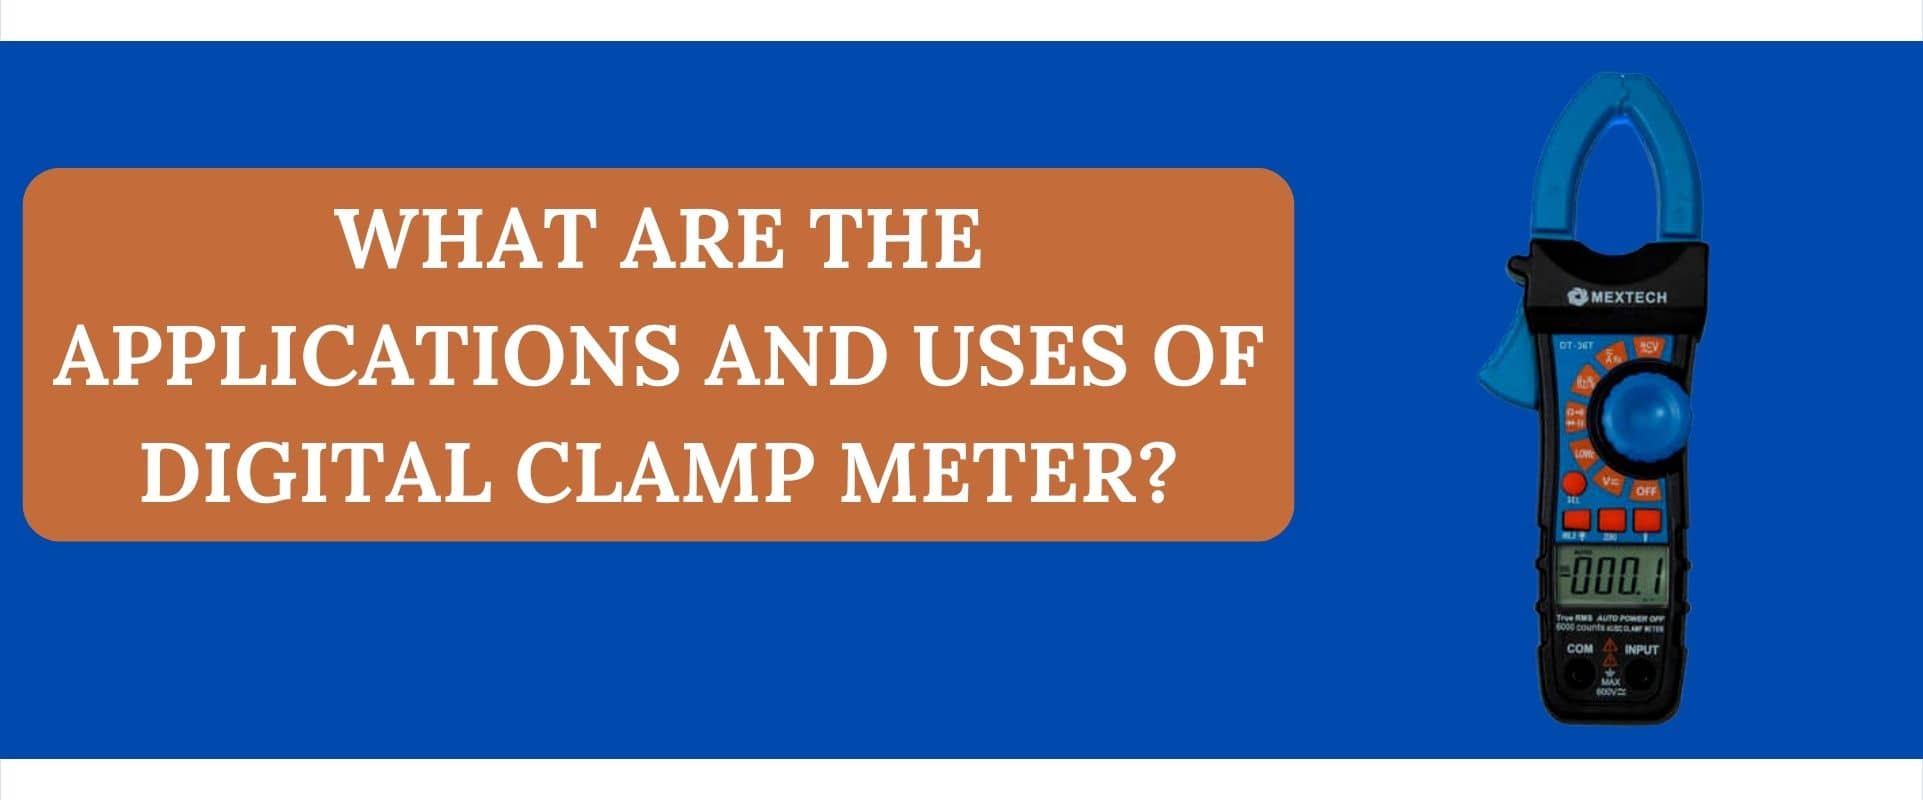 What are the Applications and Uses of Digital Clamp Meter?